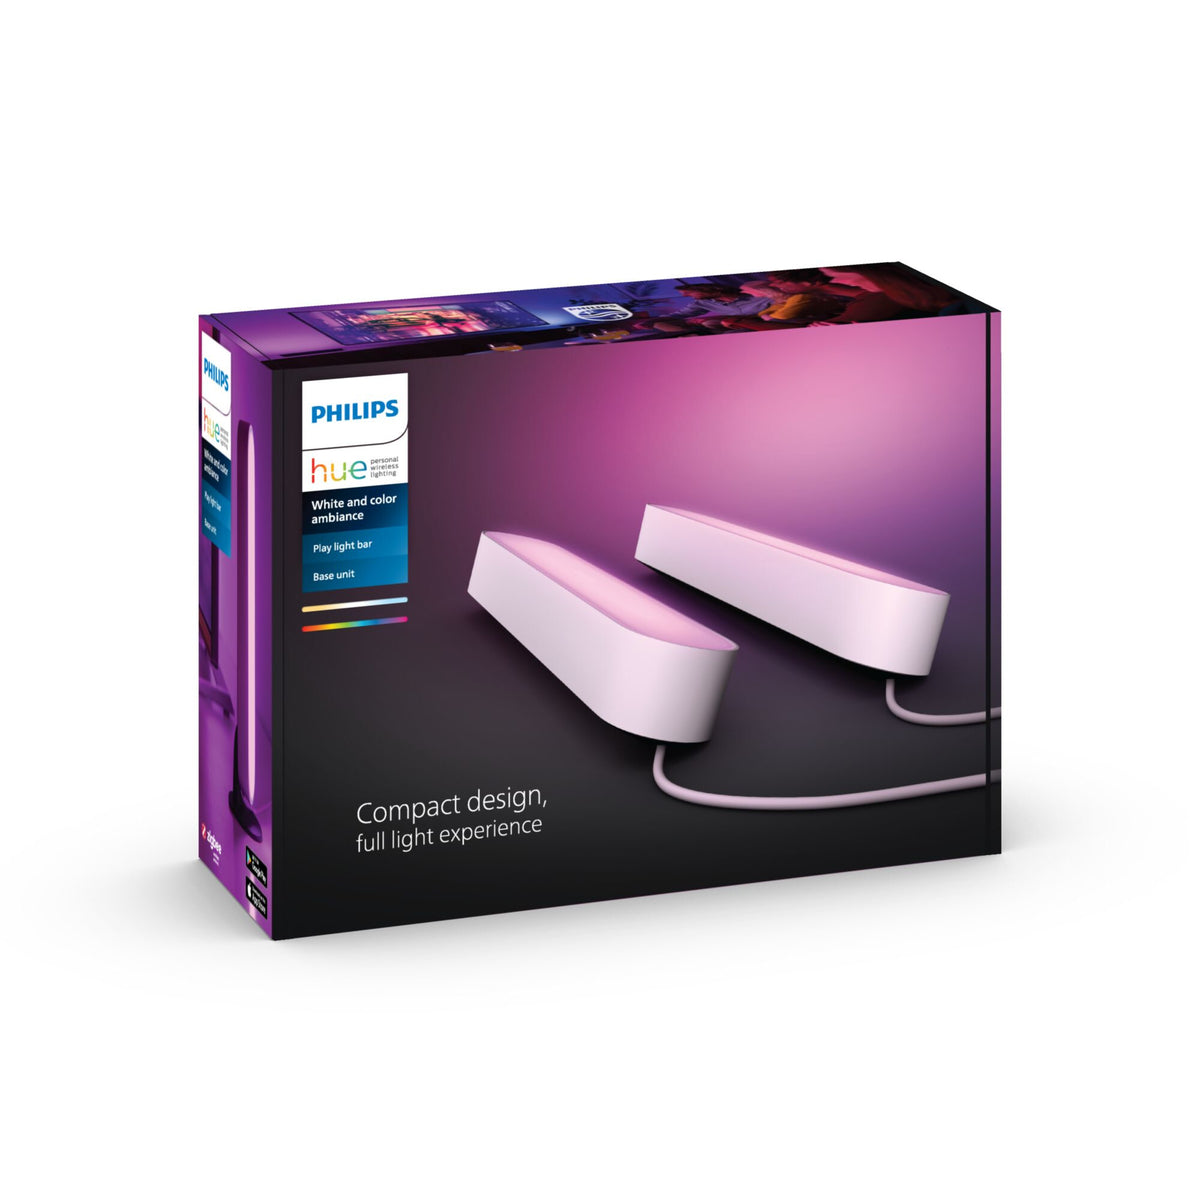 Philips Hue Play light bar in White - White and colour ambience (Pack of 2)